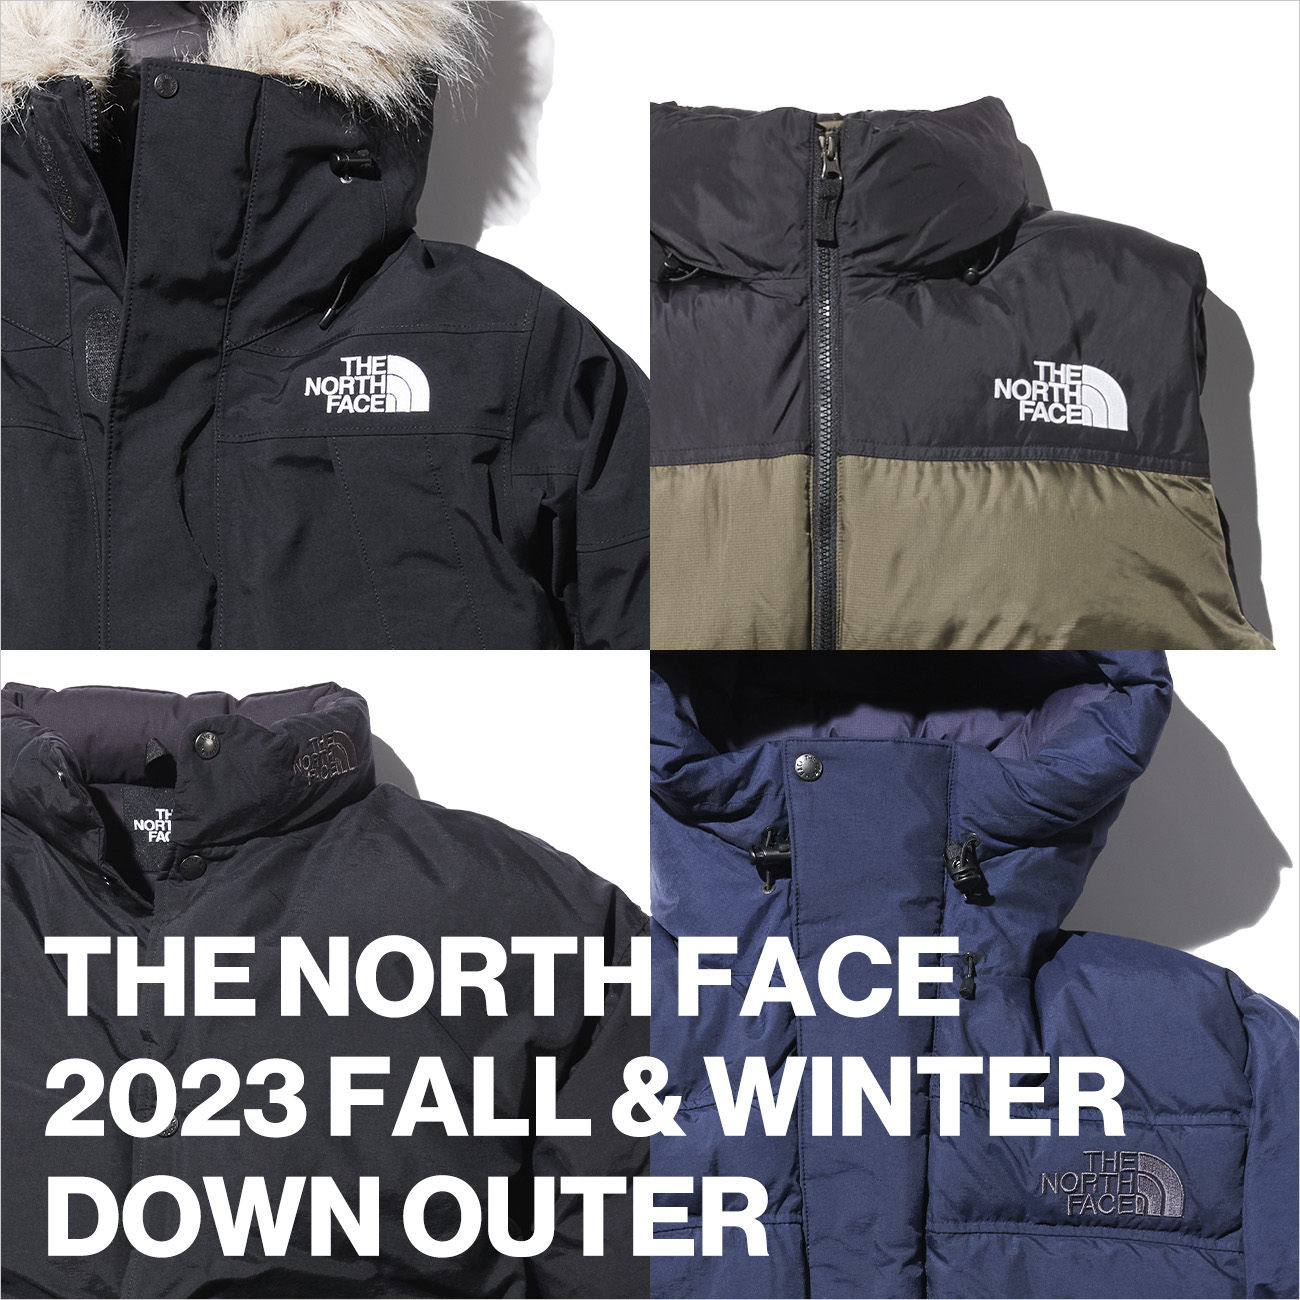 THE NORTH FACE 23FW DOWN OUTER